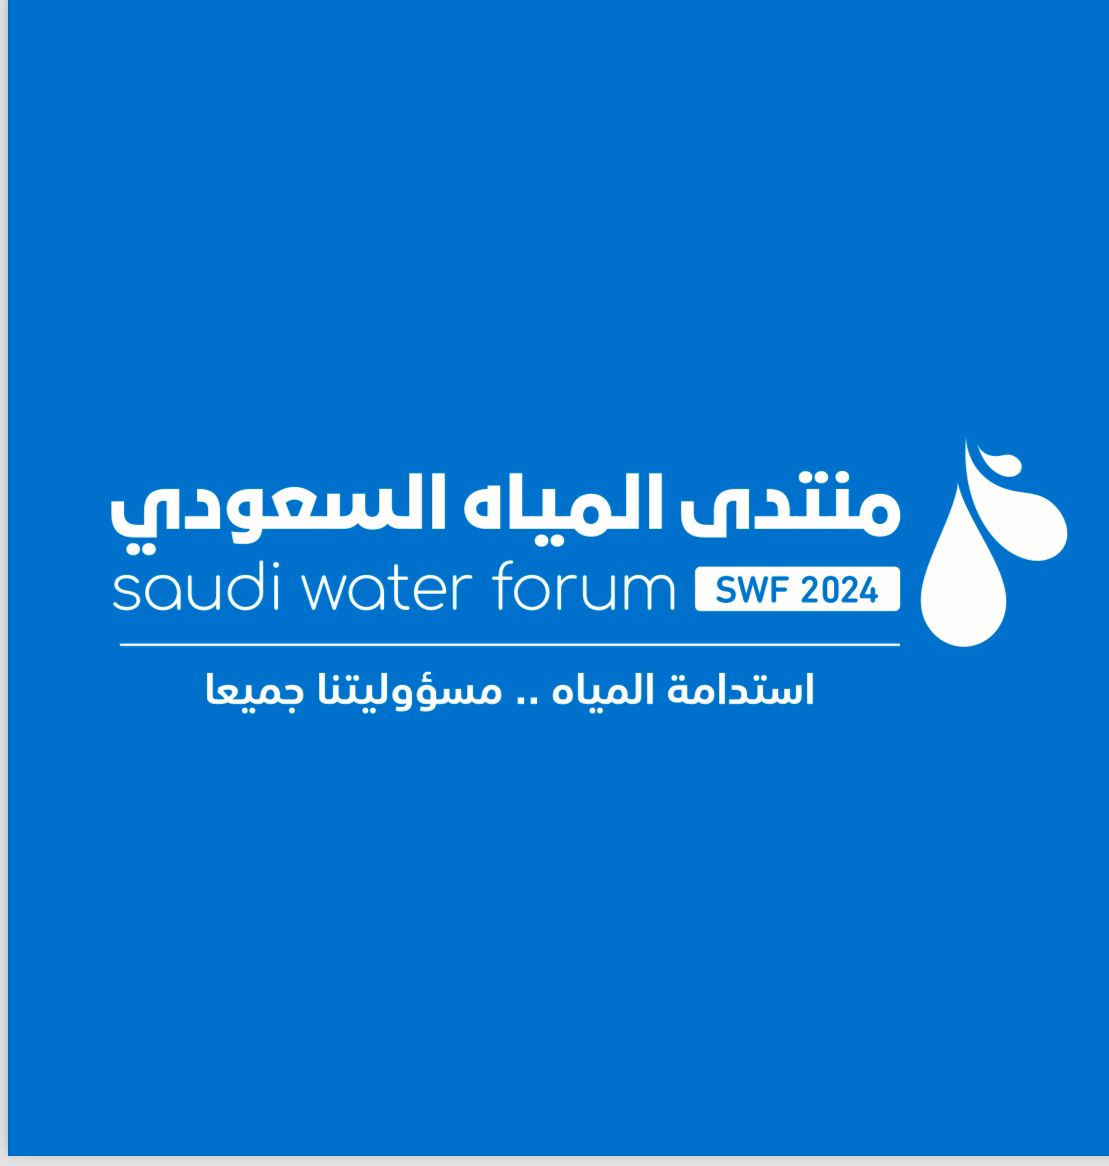 Saudi Water Forum 2024: Addressing Water Issues and Challenges